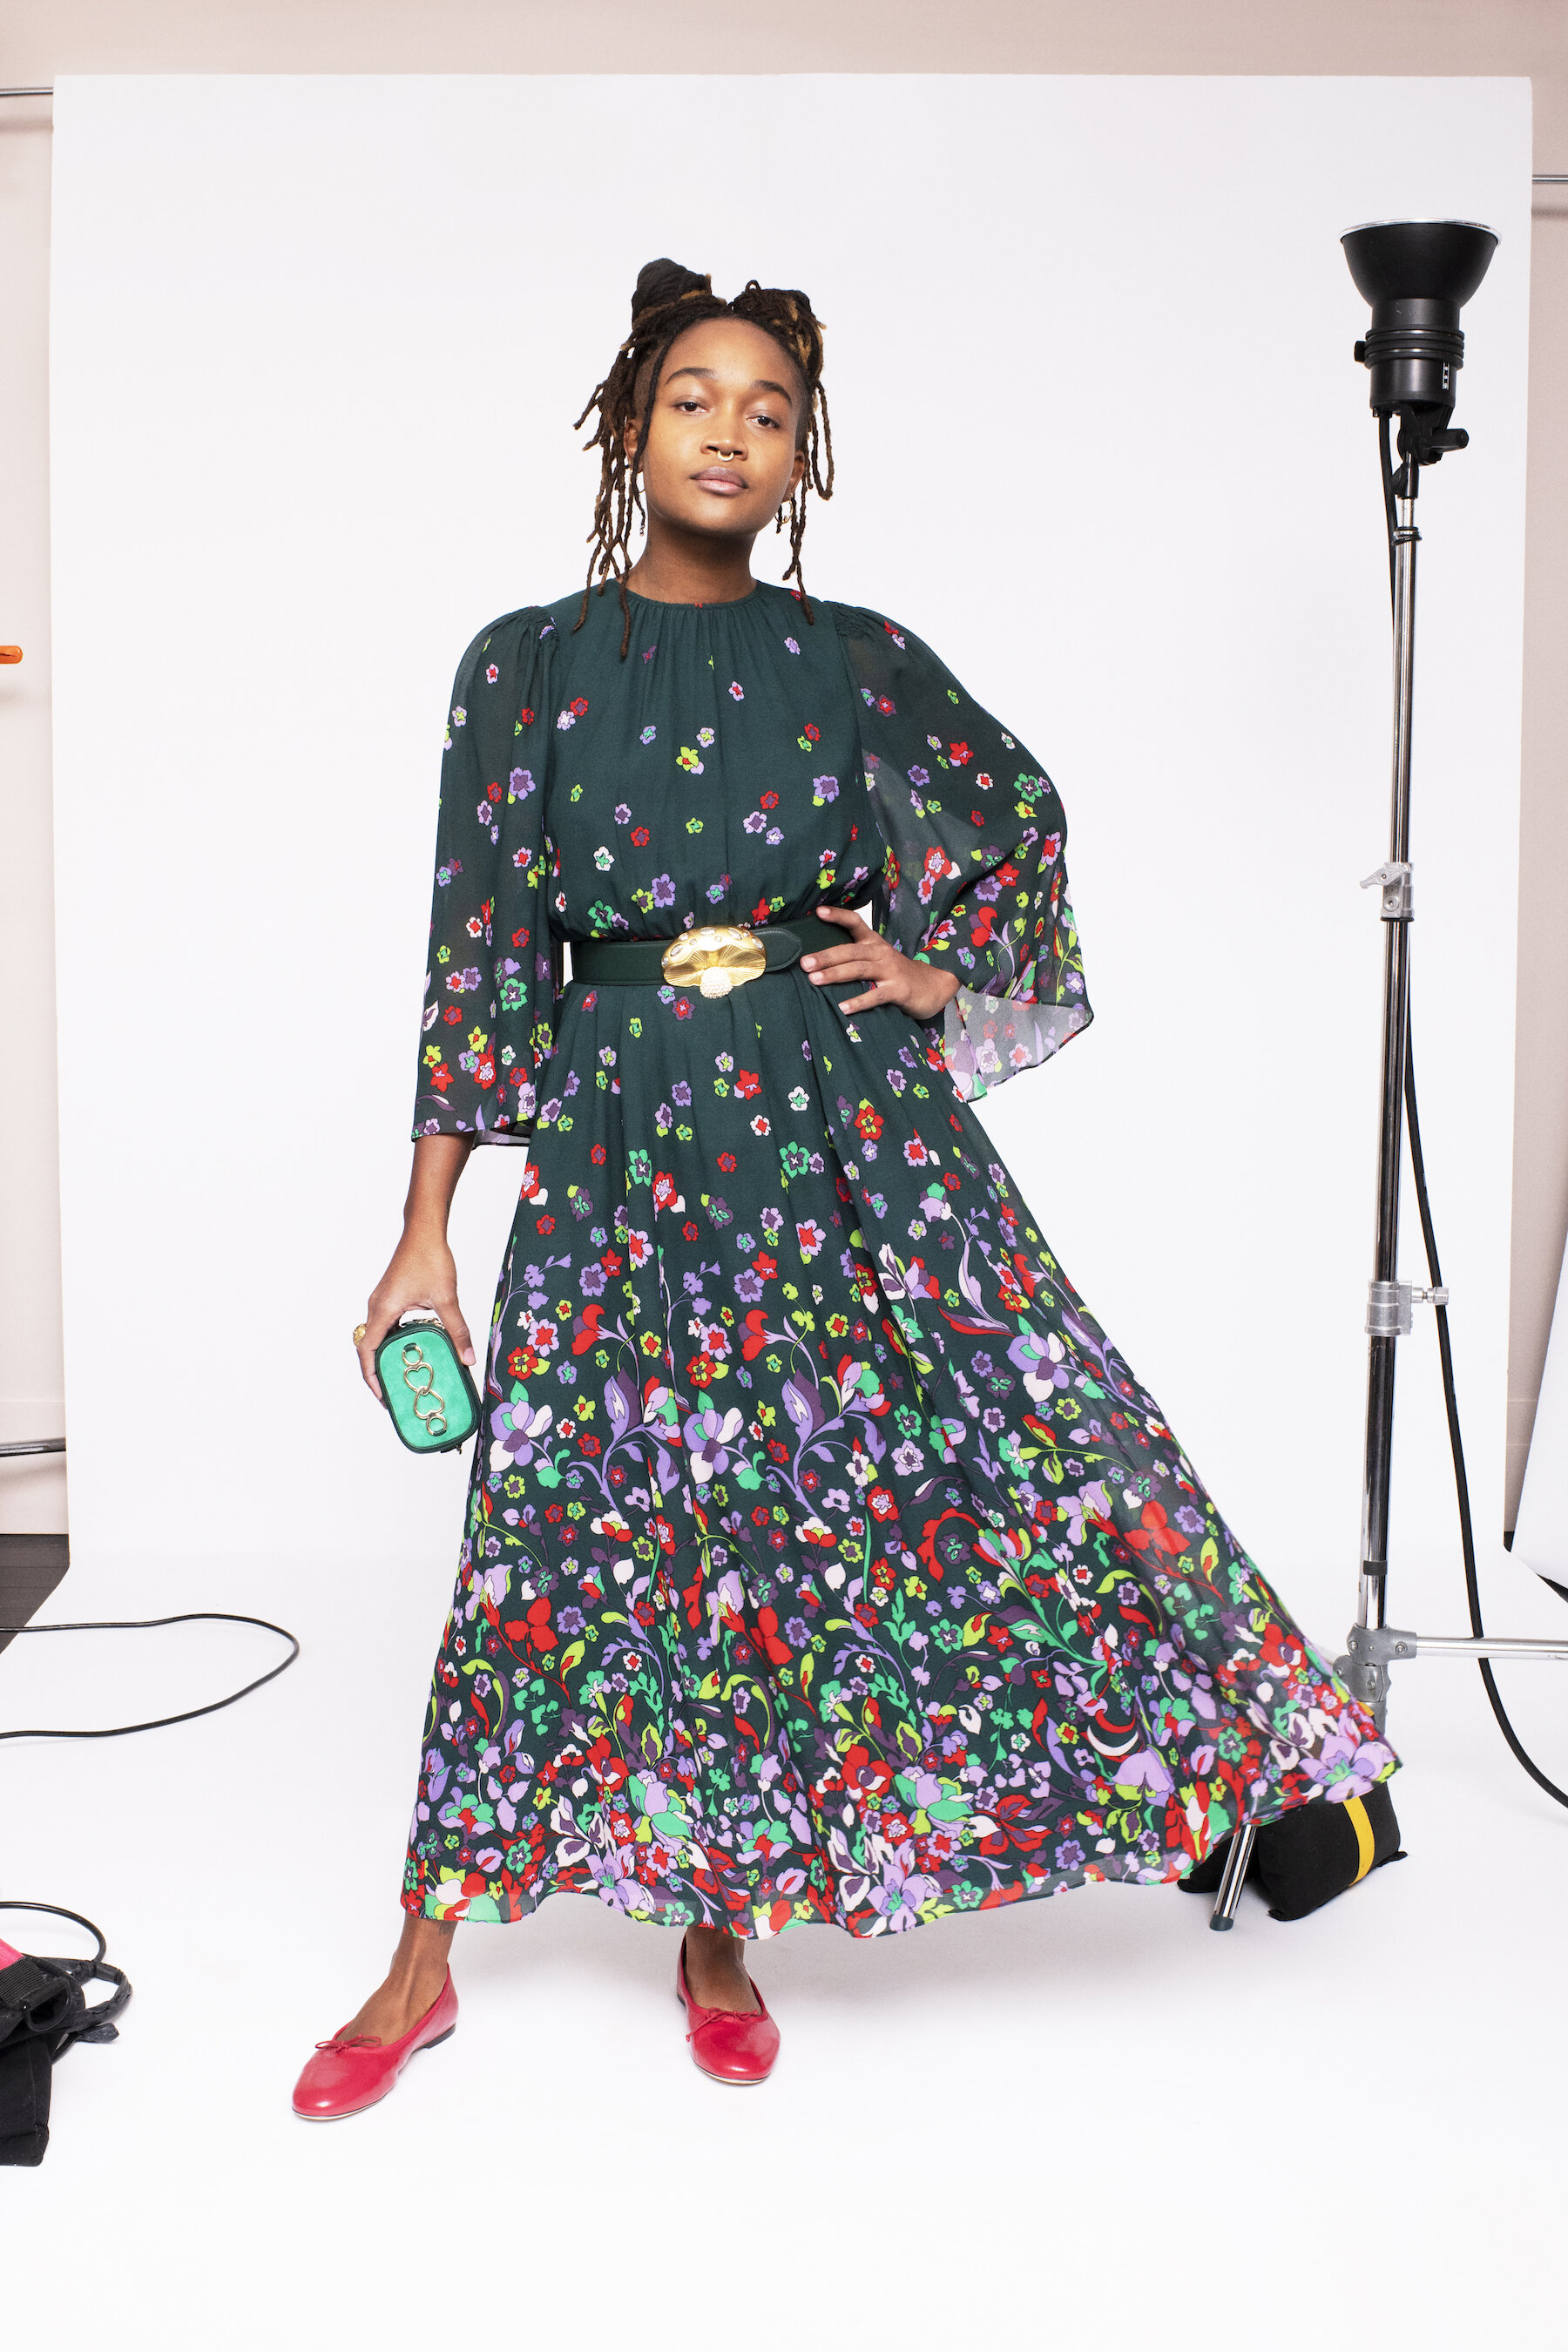 Kate Spade New York Debuts It's Fall 2020 Collection — SSI Life